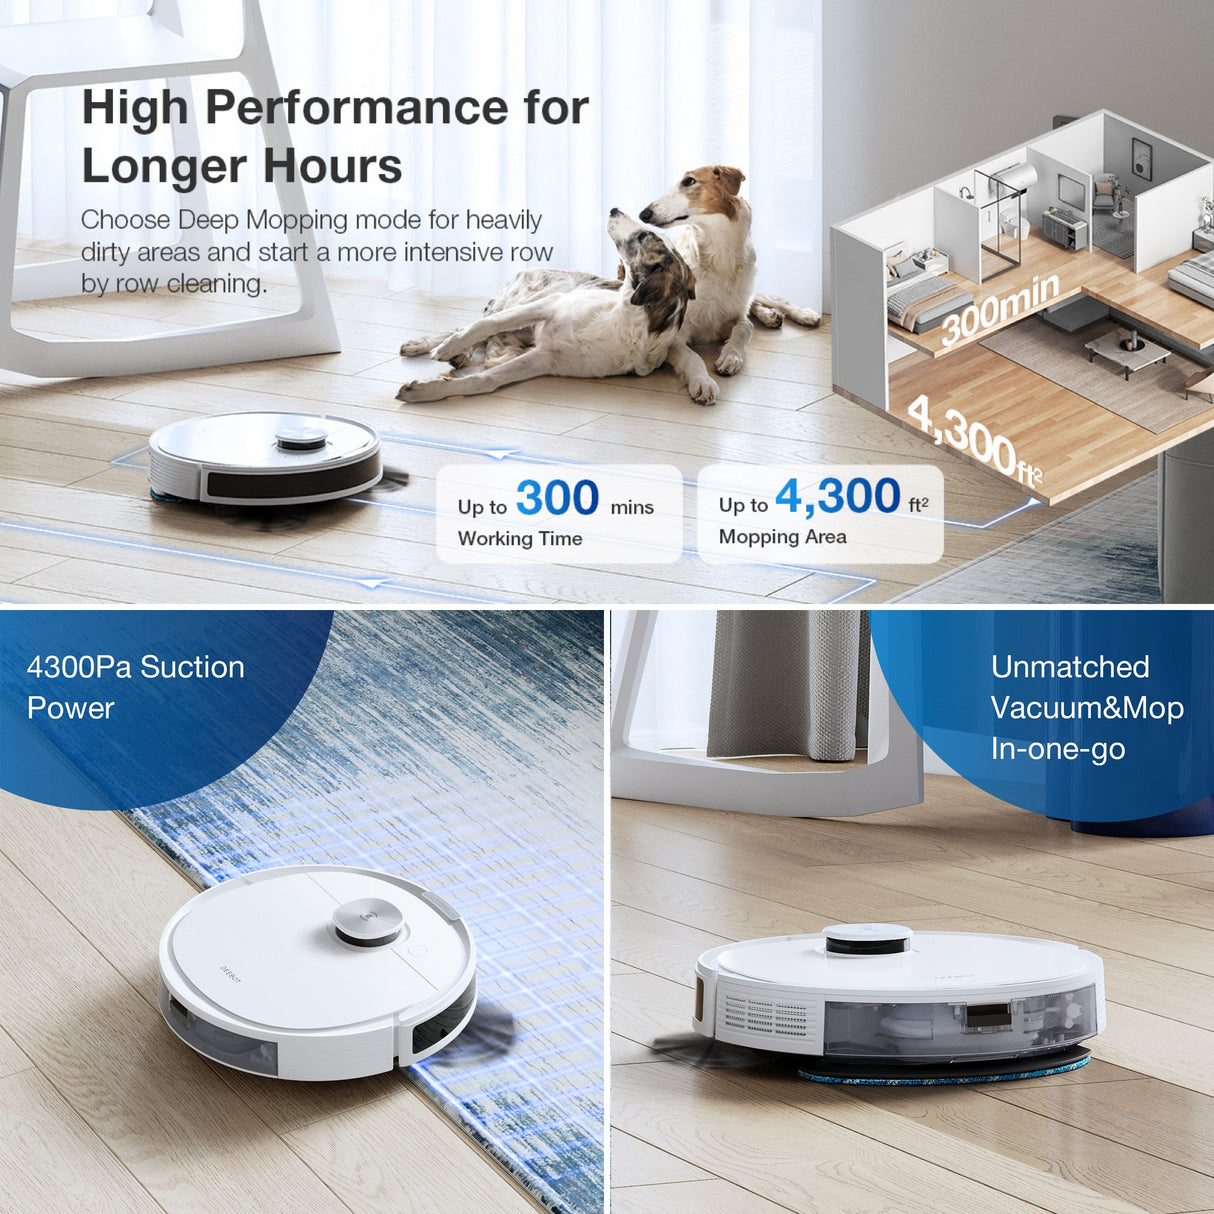 Energy-Saving Cleaning with ECOVACS DEEBOT N10 - 40% OFF!